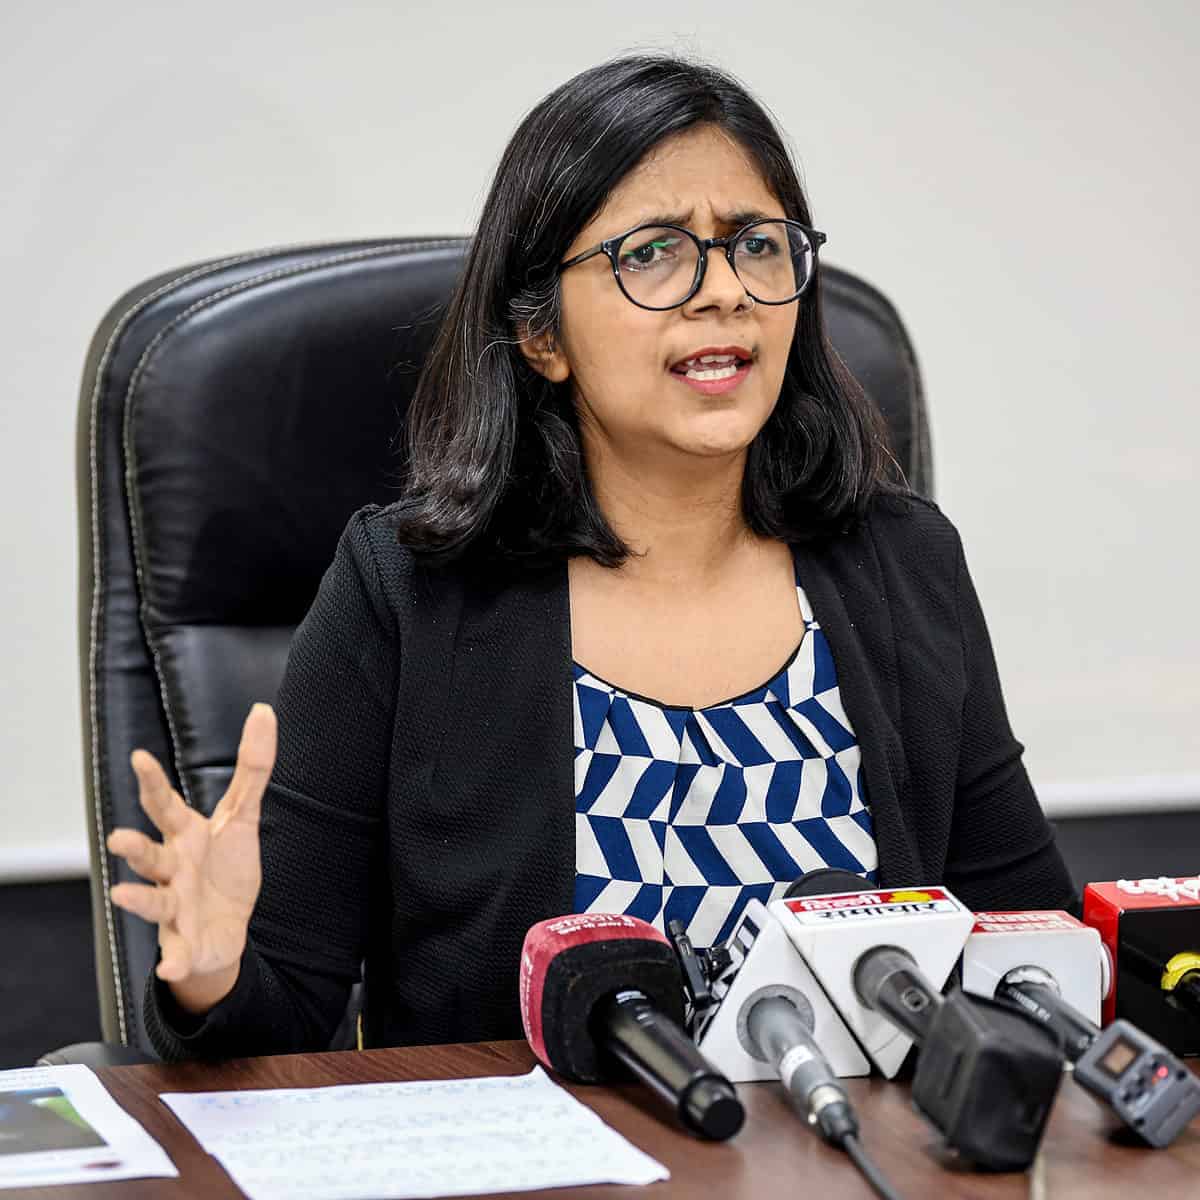 DCW chief molestation case: Accused AAP member, sting done to defame Delhi Police, claims BJP